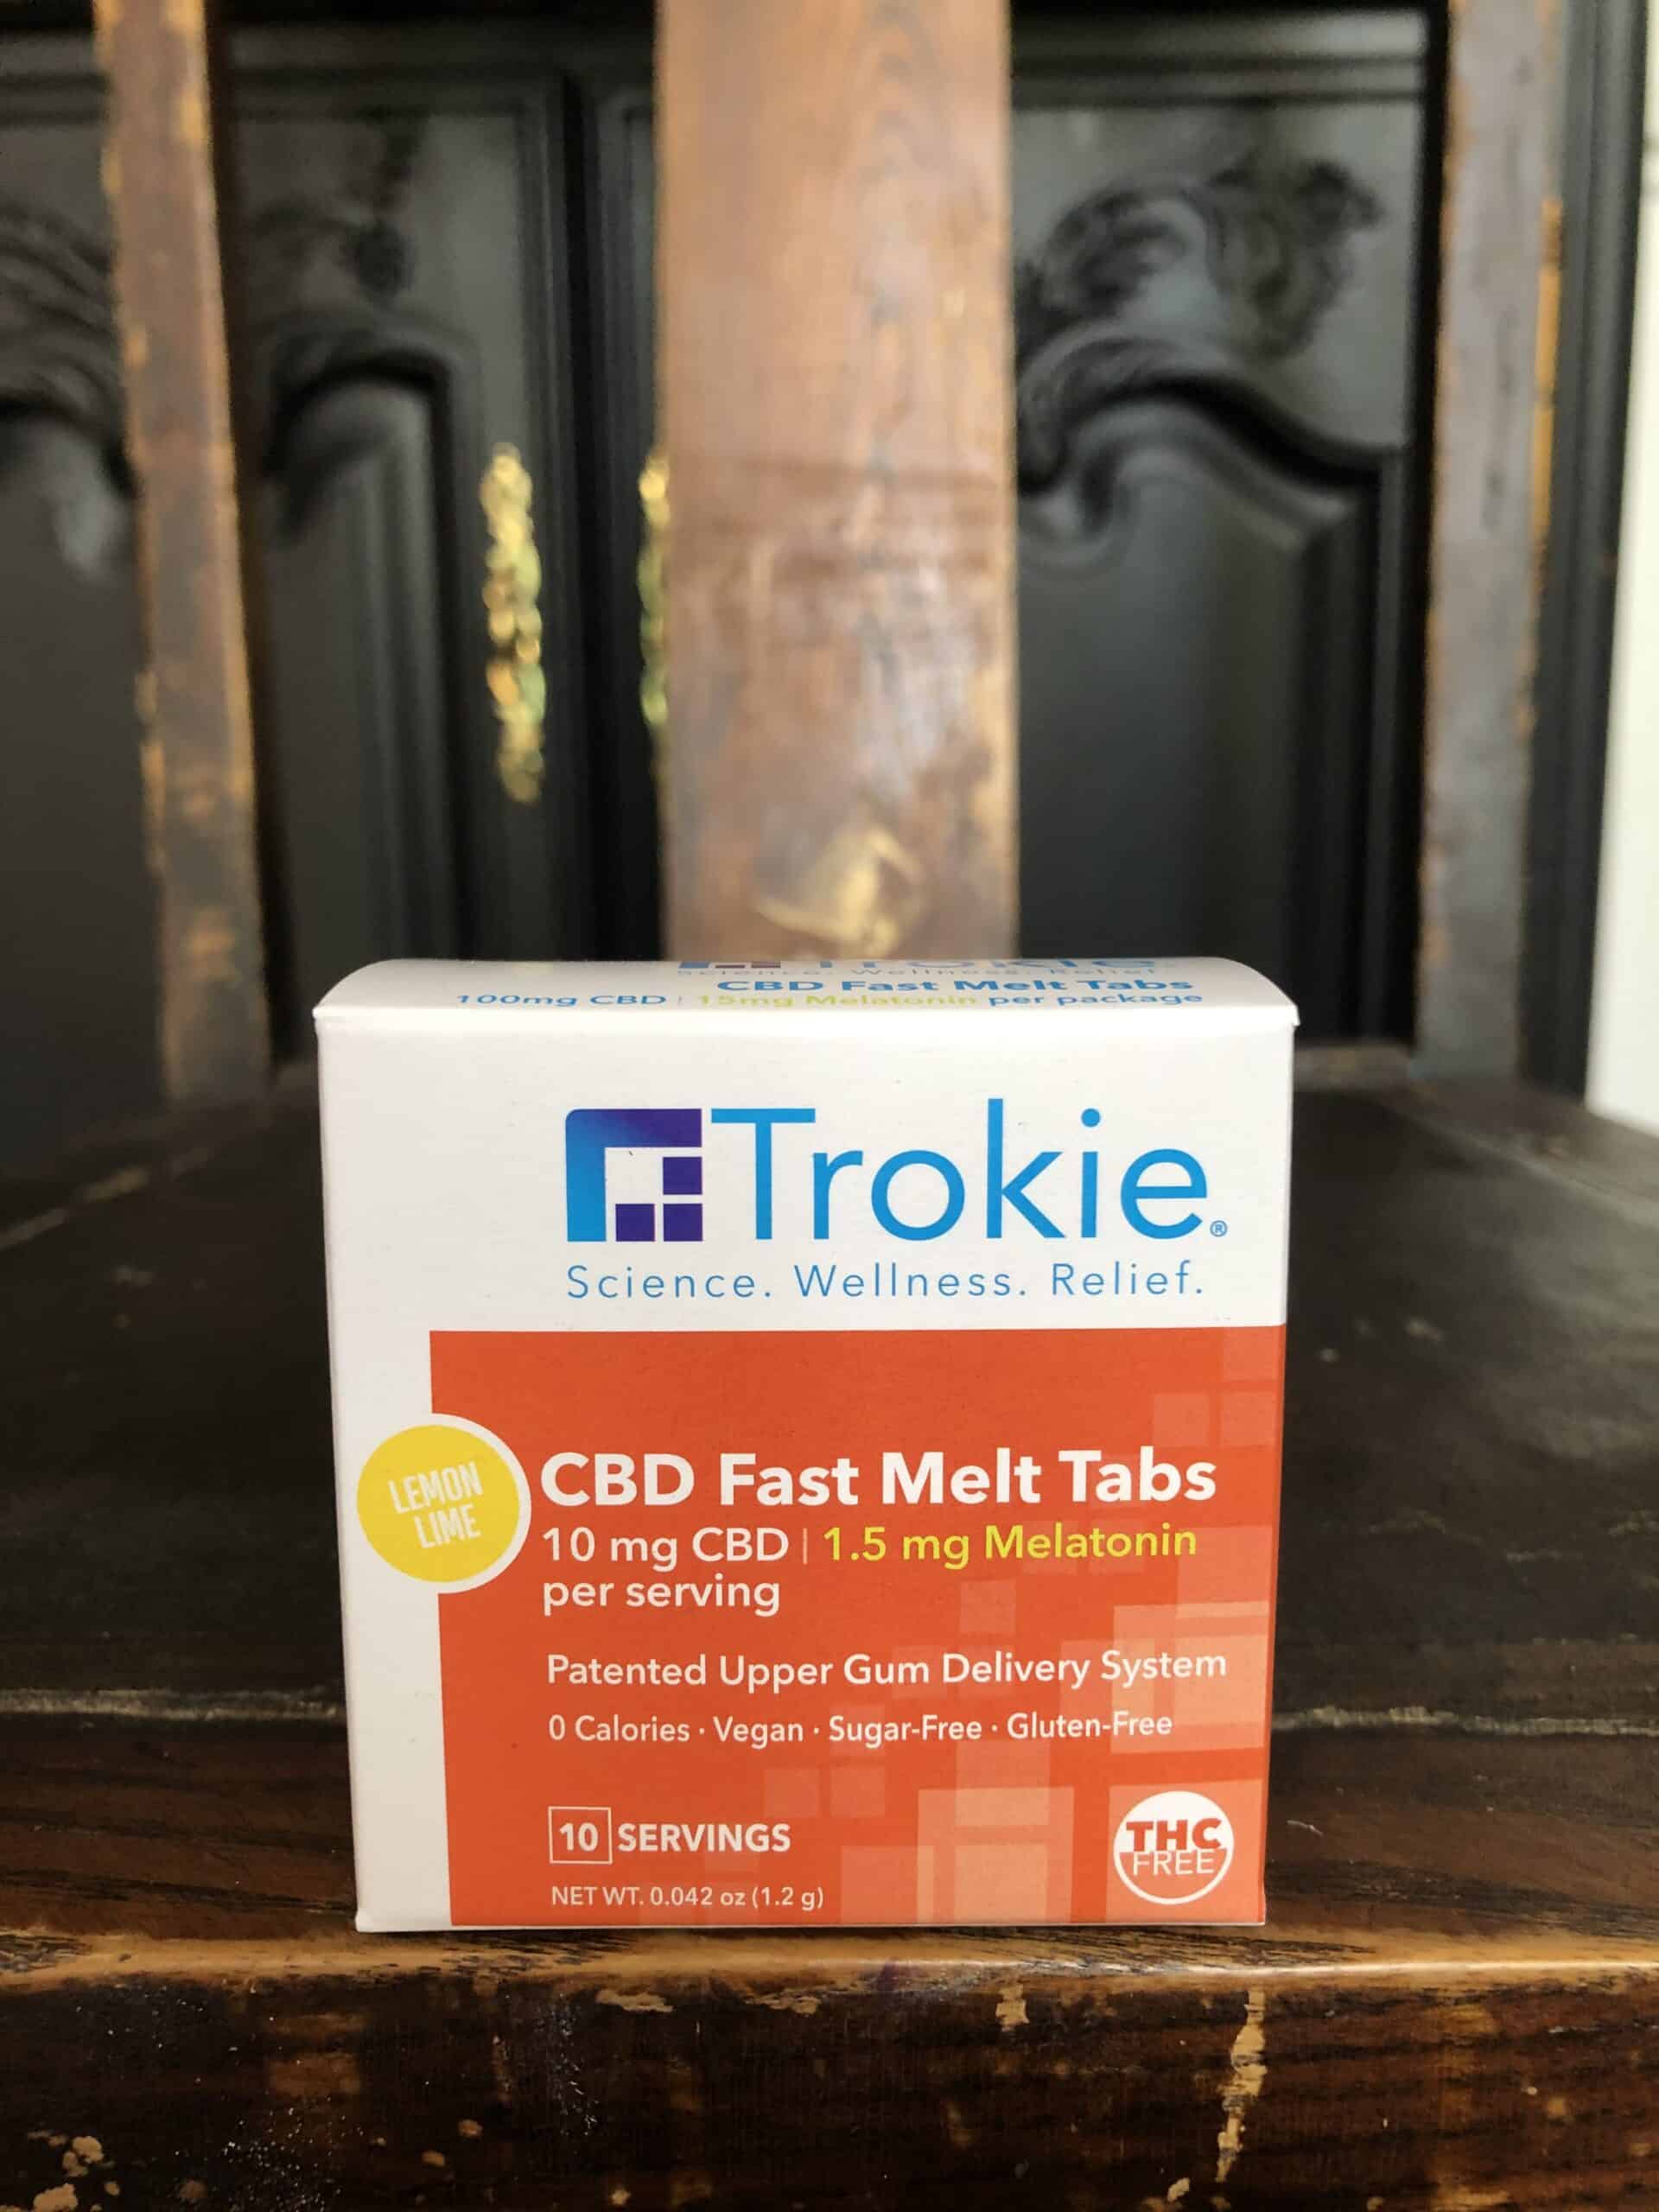 Trokie CBD Fast Melt Tabs With Melatonin Save On Cannabis Review